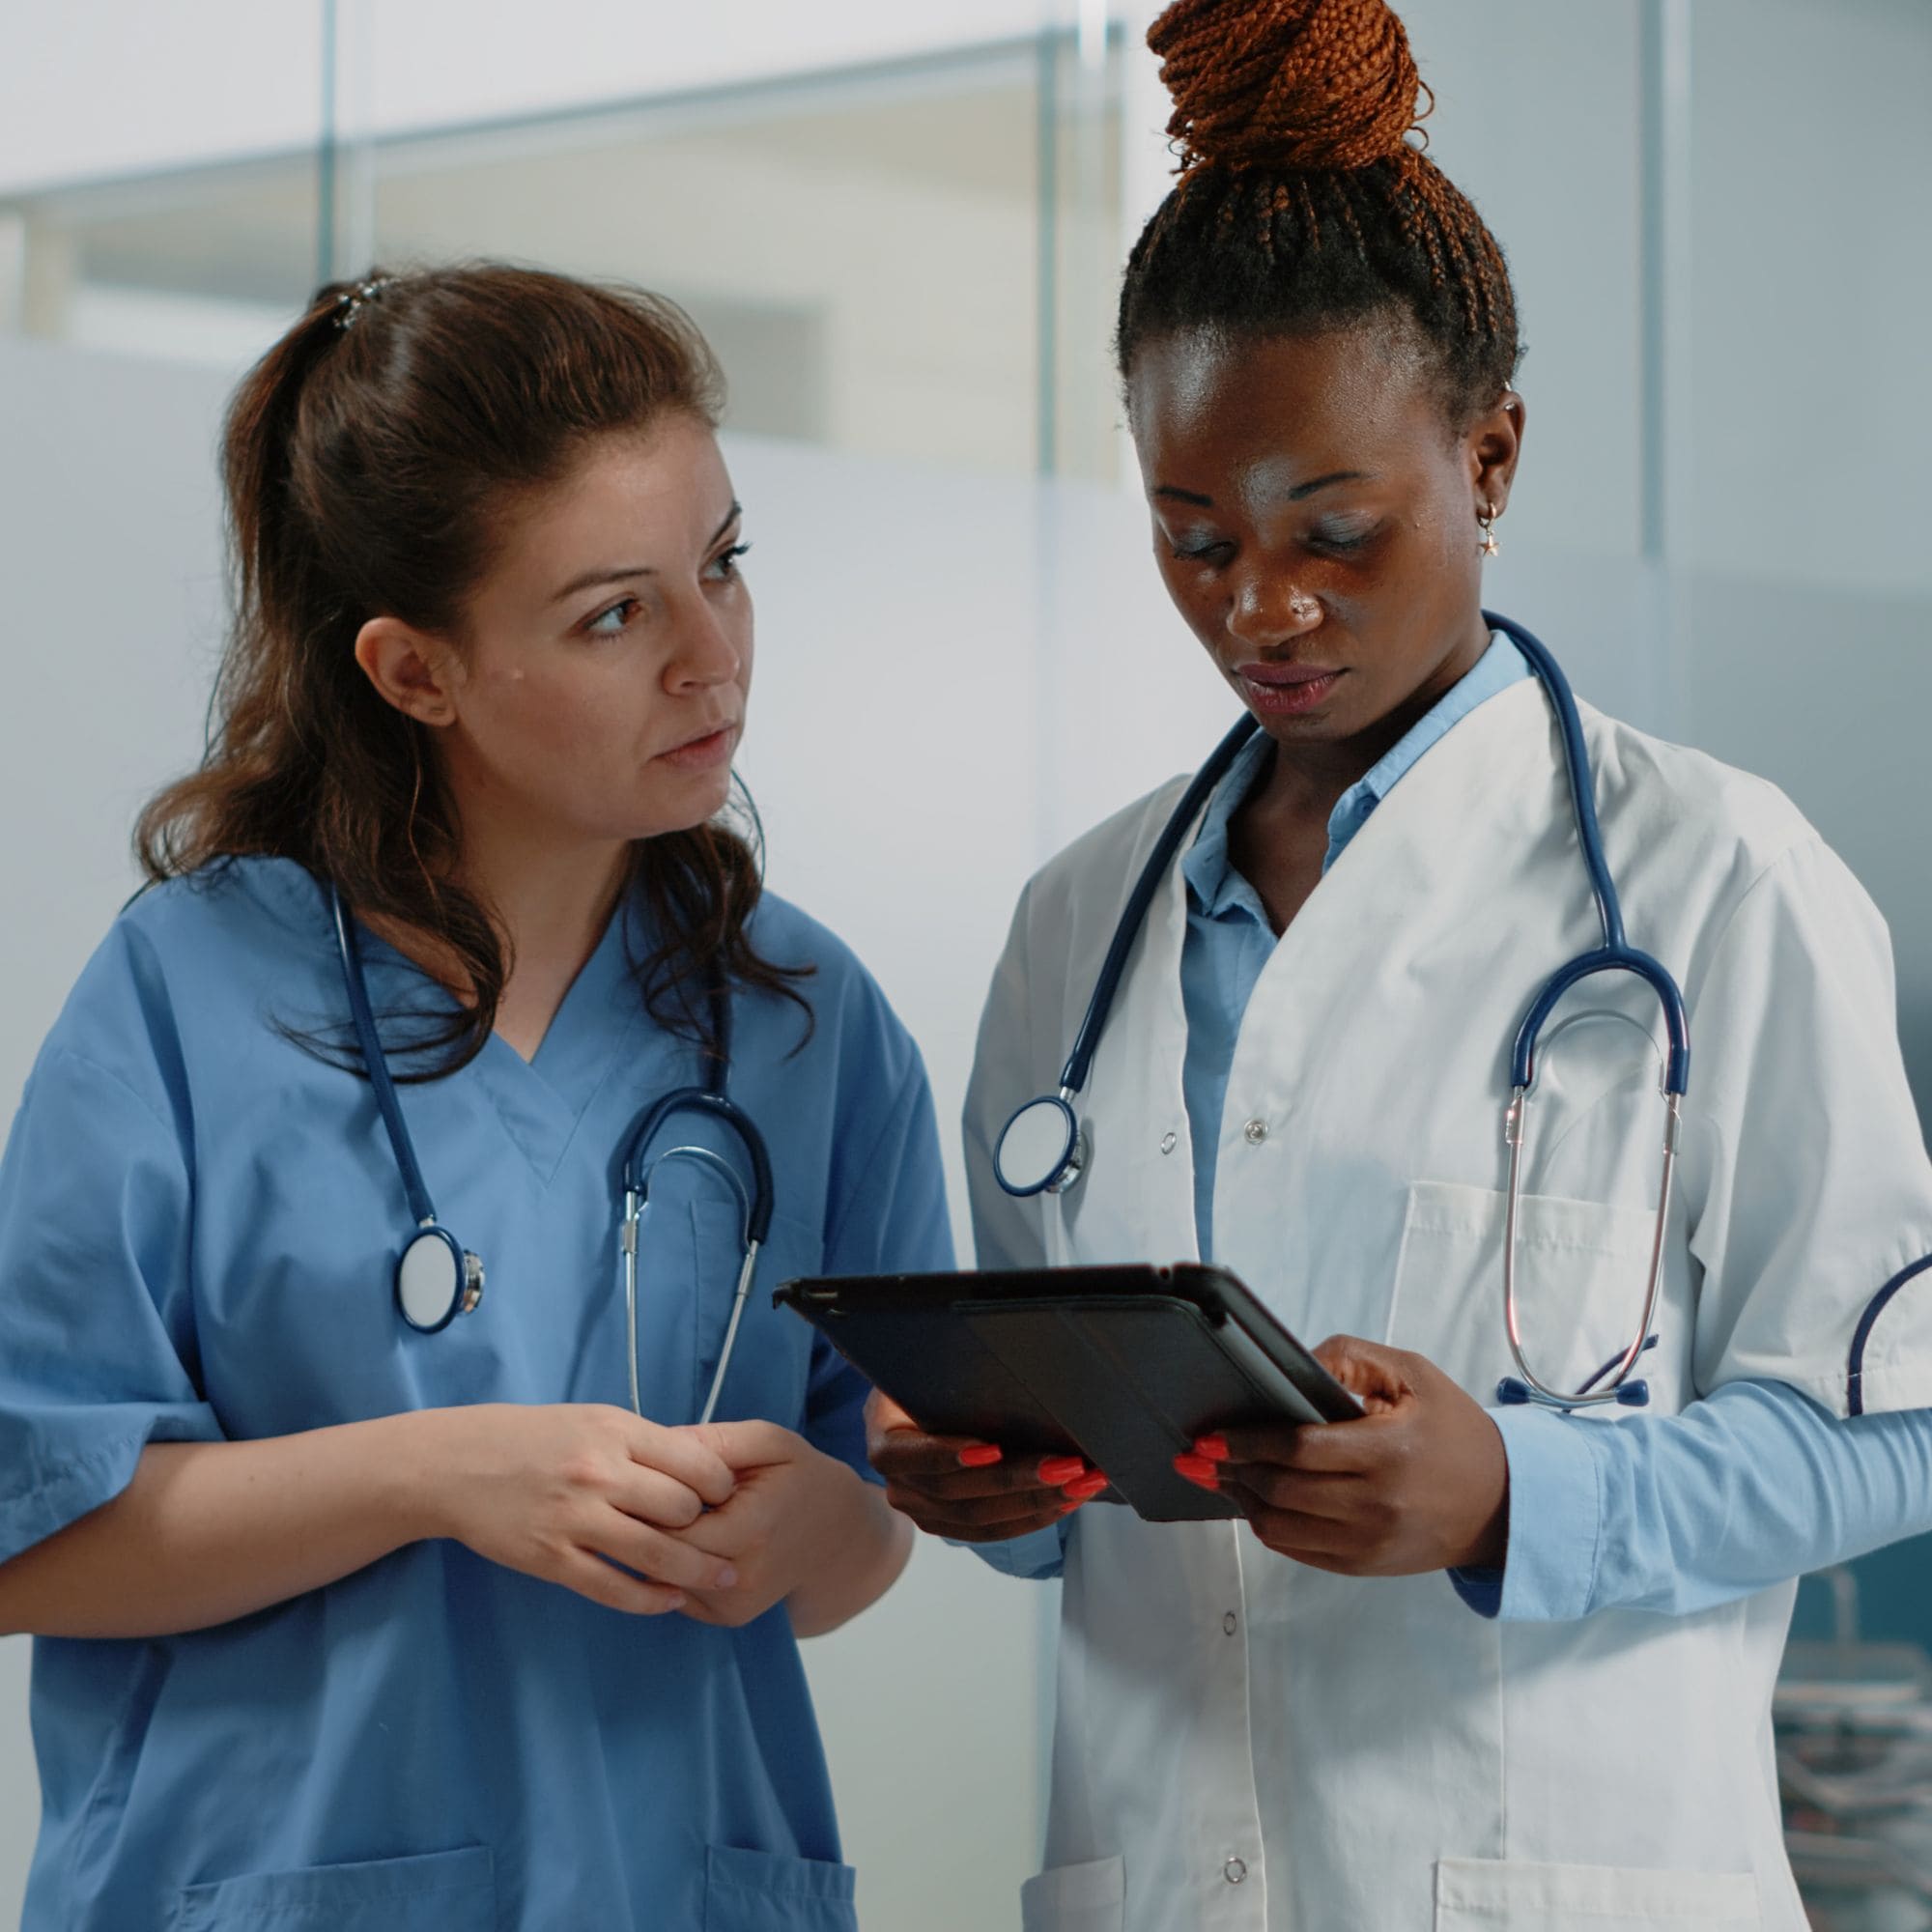 Female nurse and female doctor looking at tablet